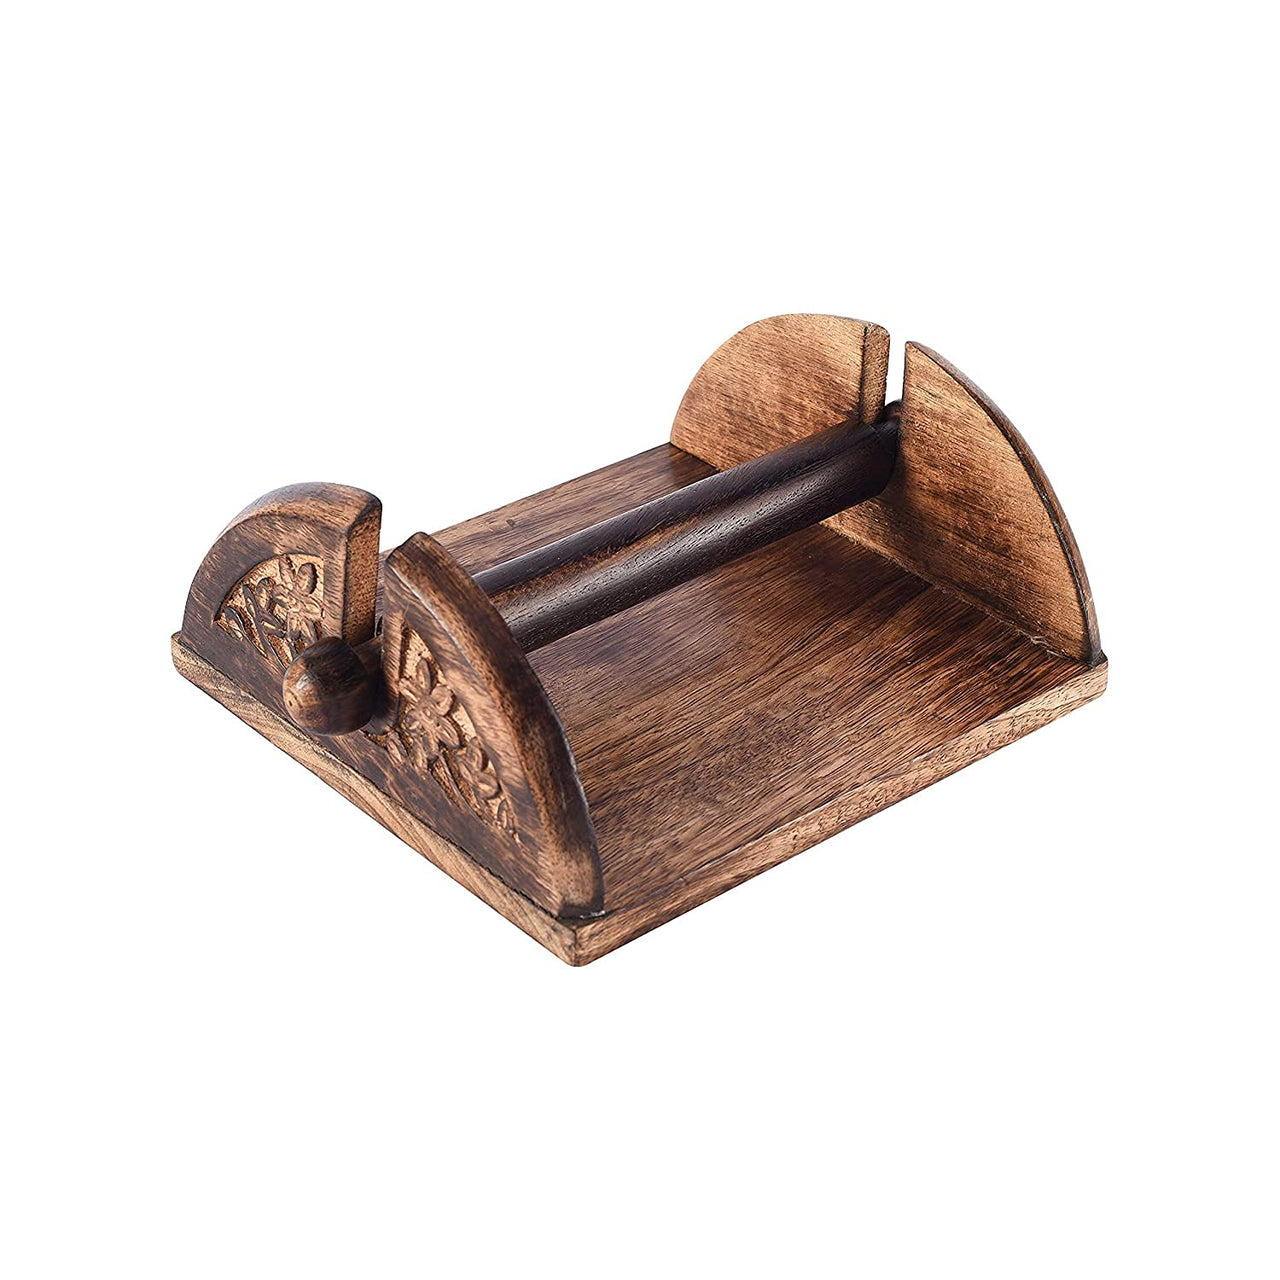 Antique Wooden Carved Tissue Paper Holder Decorative and Stylish Wooden Tissue Box for Car, Facial Paper Napkin Holder Case Dime Store